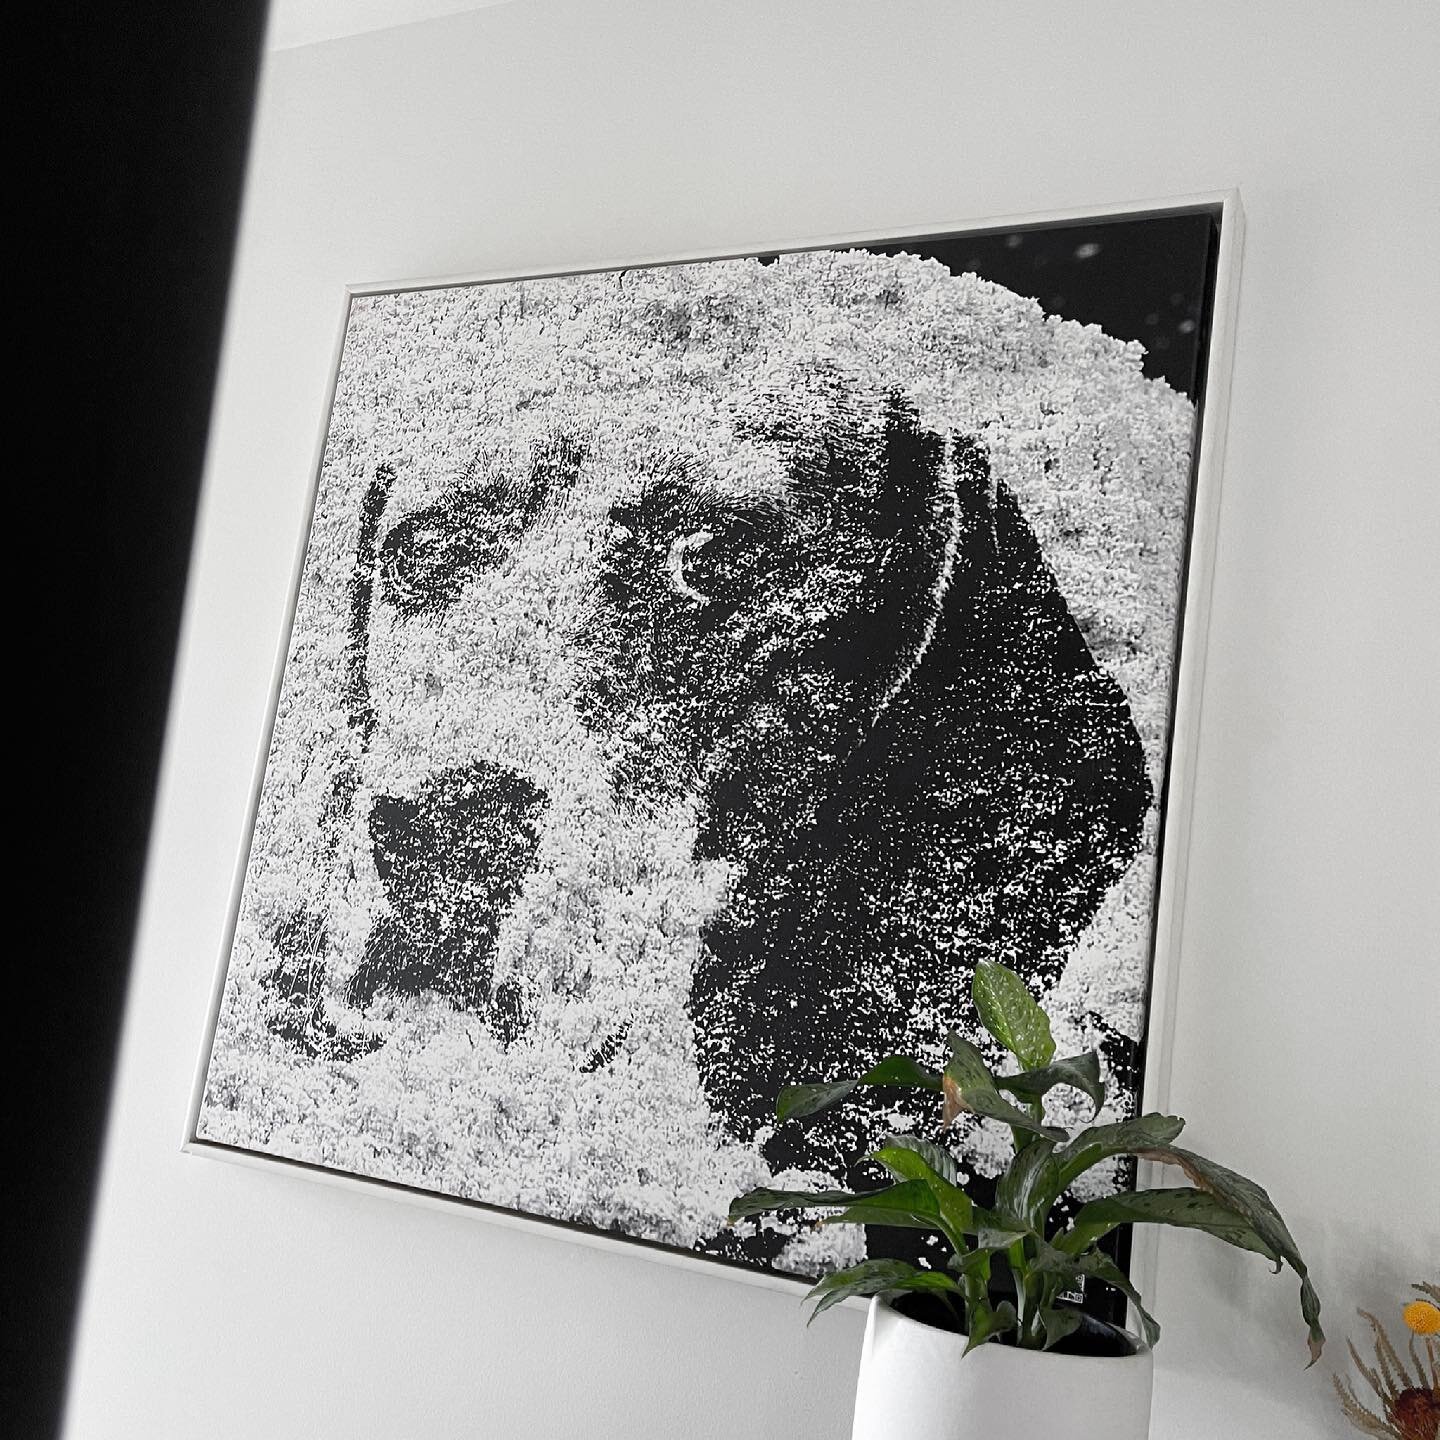 Wall decor at its finest!😏 The subtle yet piercing eyes of &lsquo;Sniffer&rsquo; 1.42m x 1.42m on canvas.
.
.
.
.
.
#art #artwork #canvas #beagle #wallart #artoncanvas #dog #design #walldecor